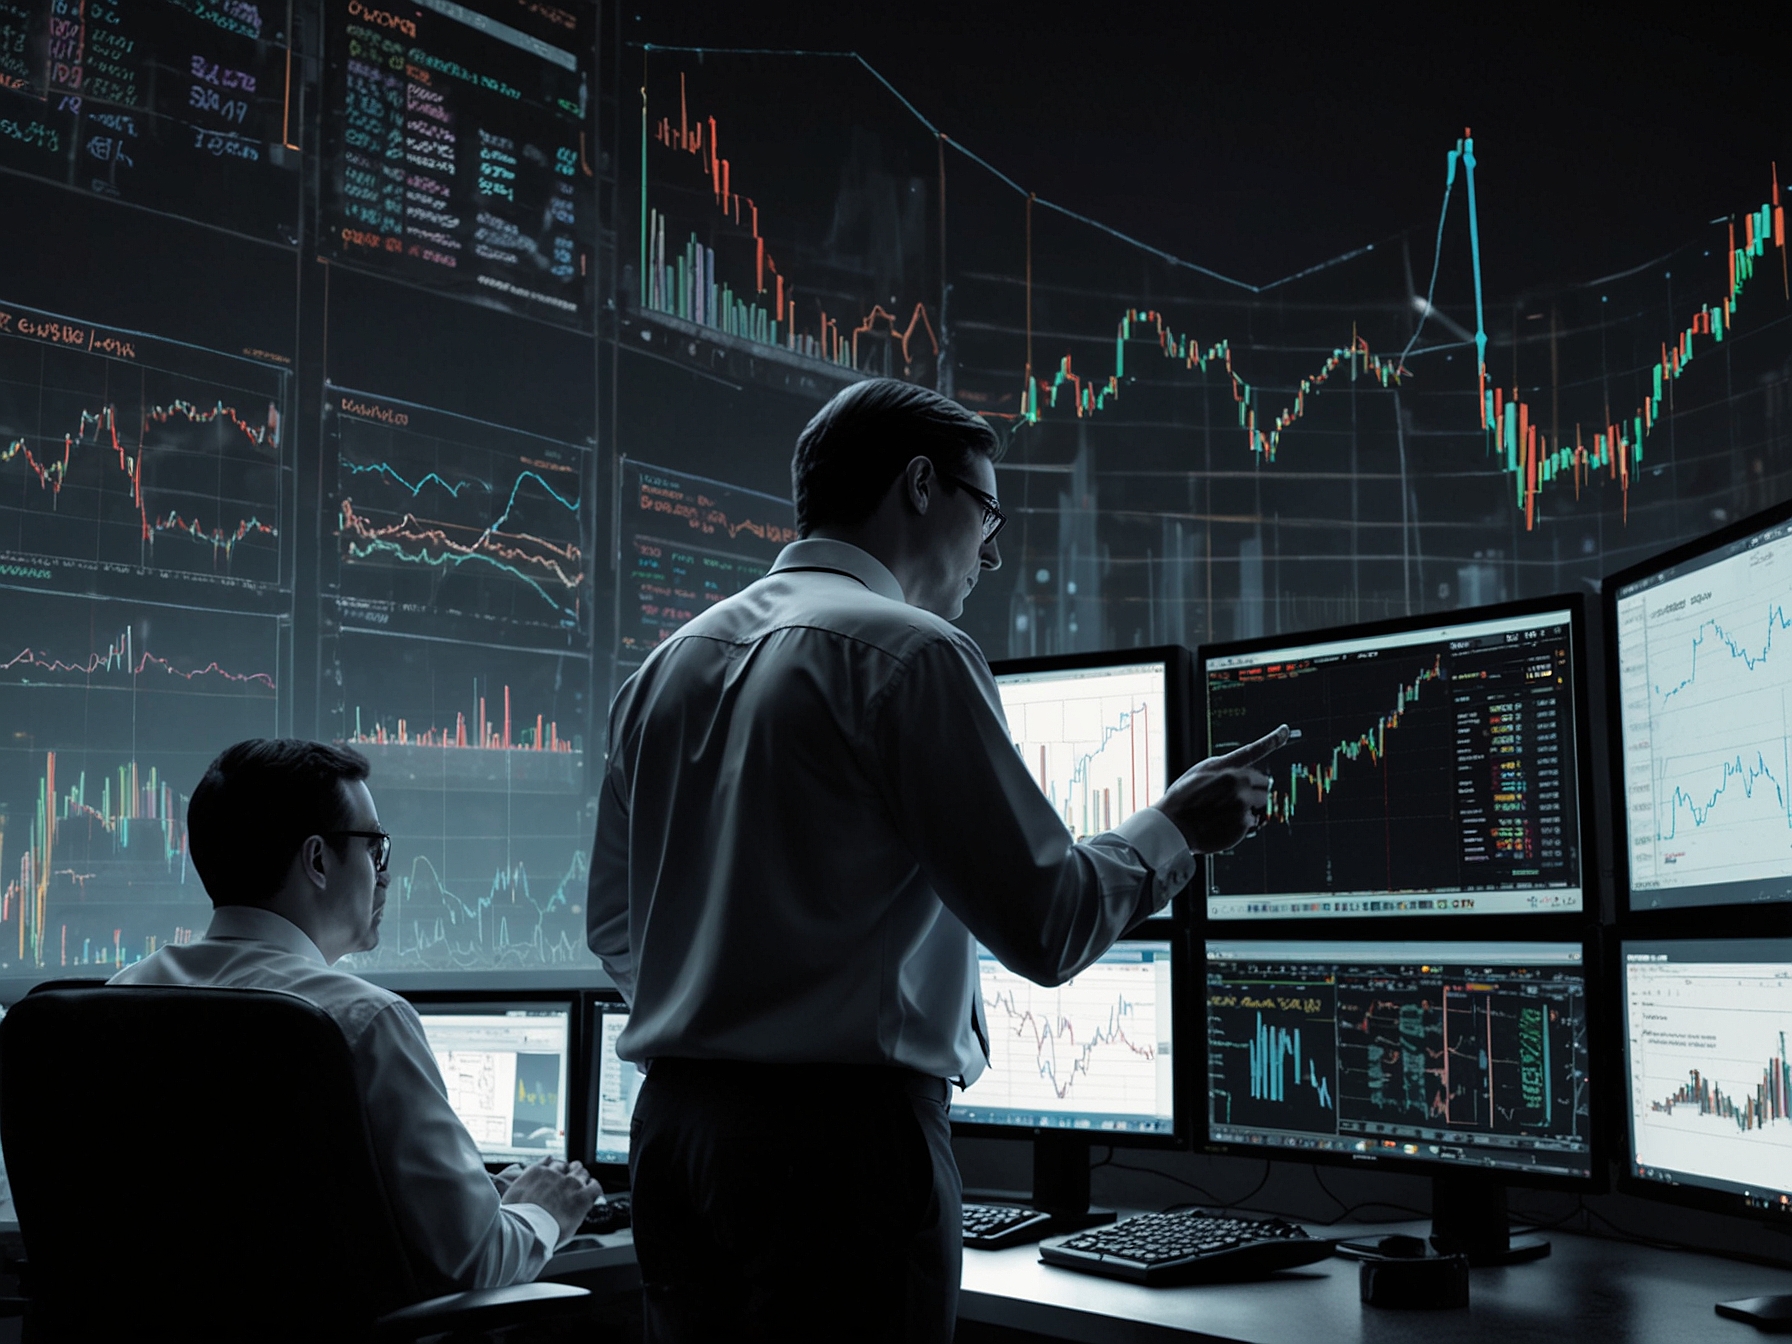 Investors analyzing market data on computer screens, emphasizing the cautious optimism, robust economic recovery, and expected corporate earnings, contributing to the bullish market outlook.